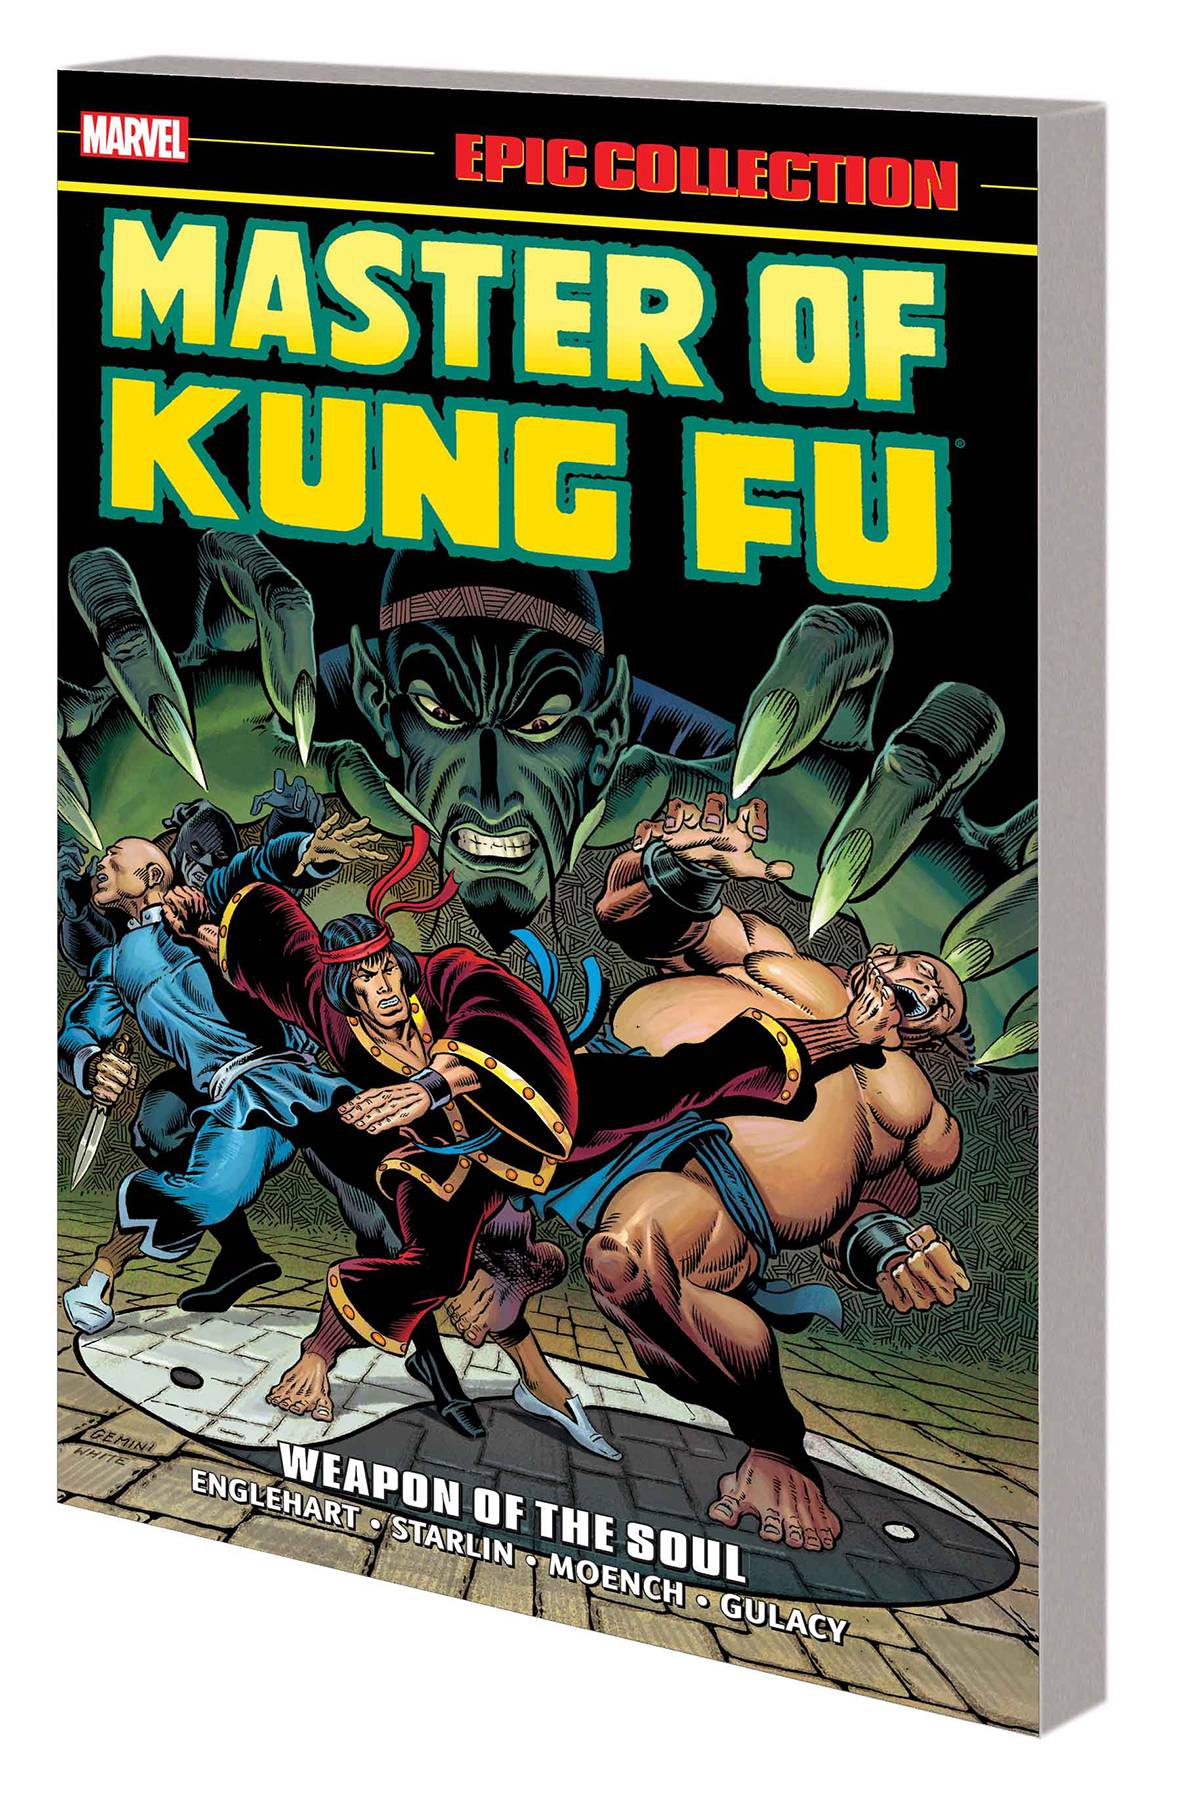 Master of Kung Fu Epic Collection Graphic Novel Volume 1 Weapon of the Soul